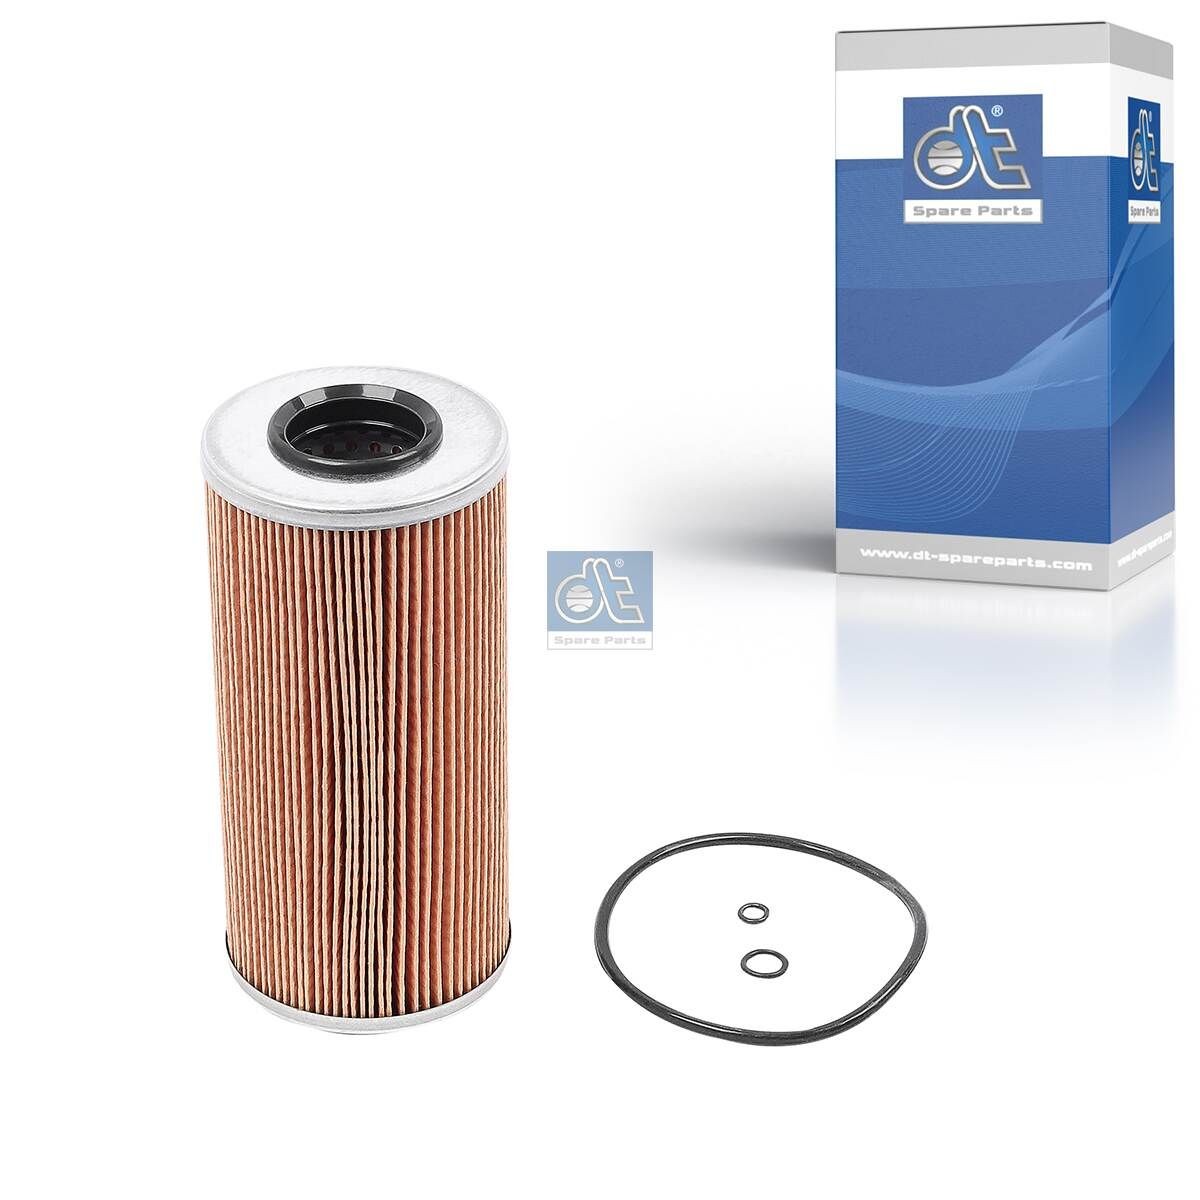 HU 951 x DT Spare Parts 3.14108 Oil filter A606 180 0910